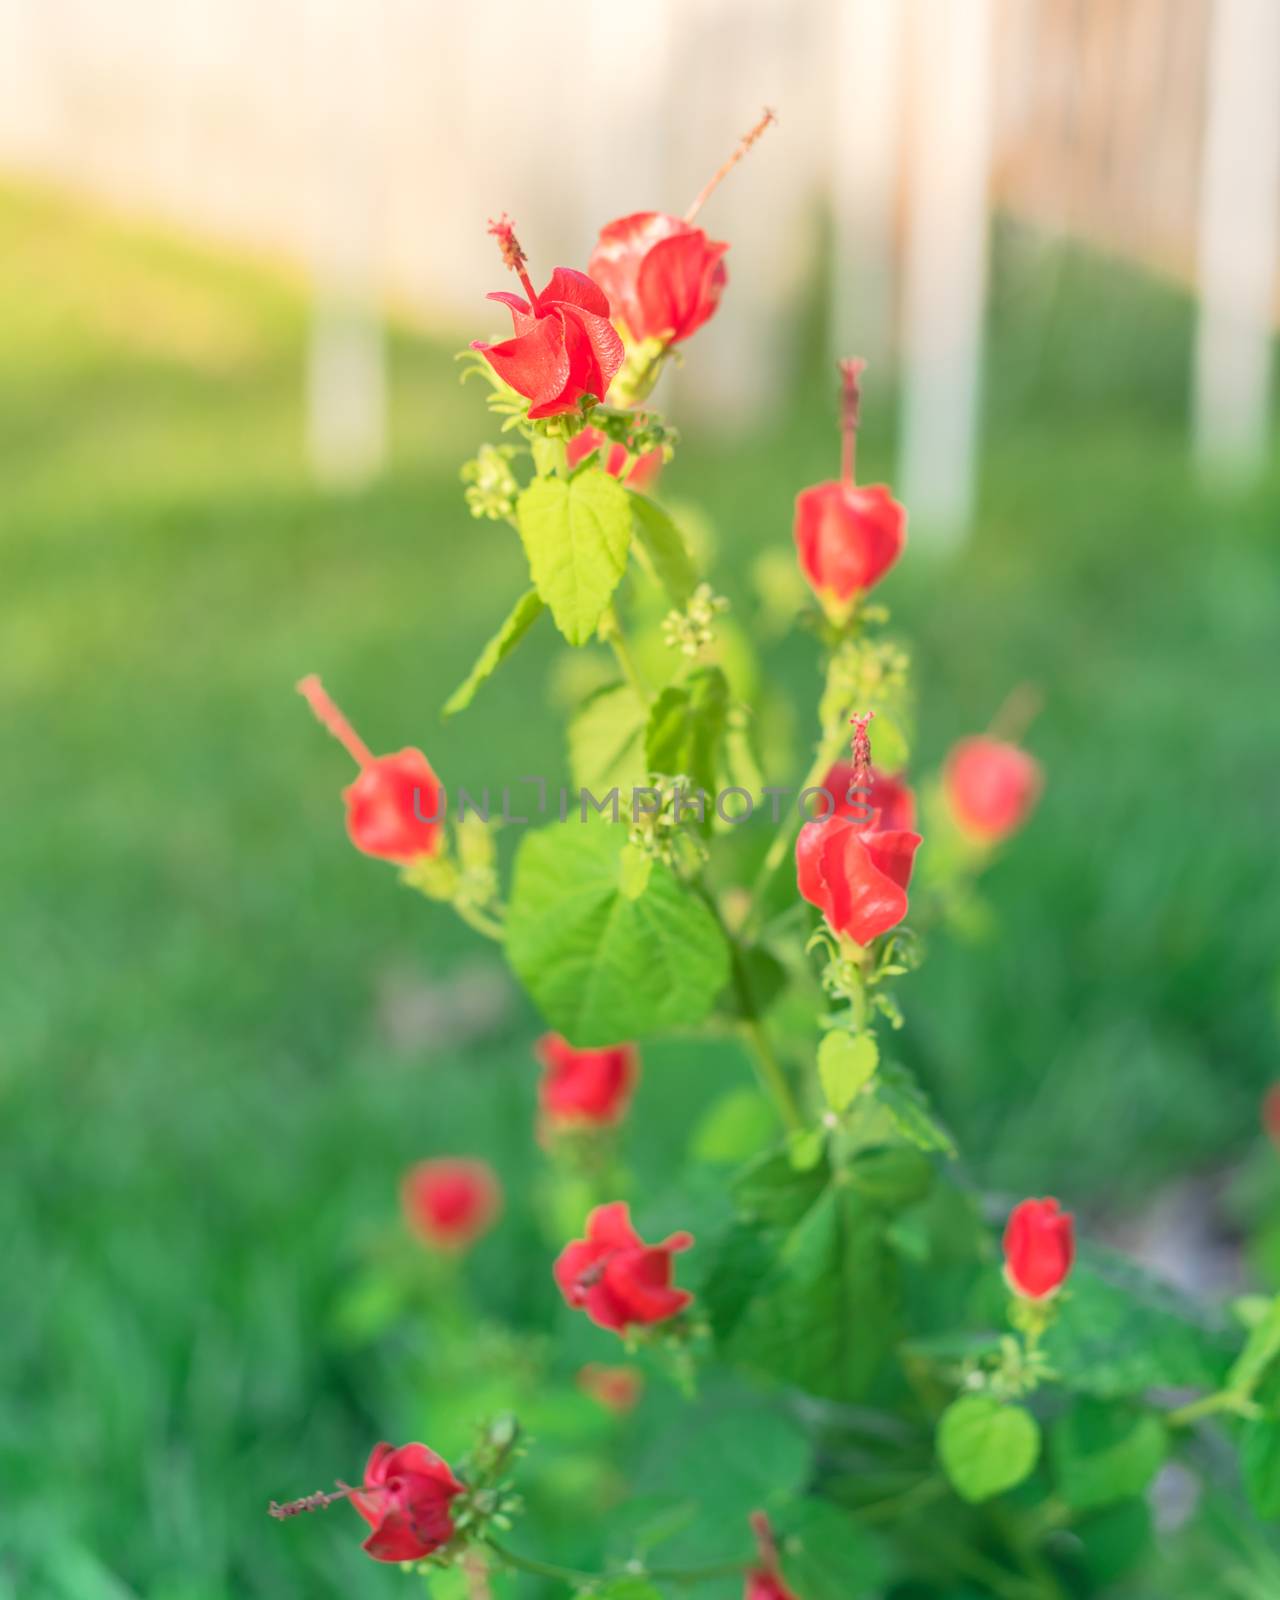 Red Turk's cap or Malvaviscus arboreus flowers with blurry fence in background by trongnguyen